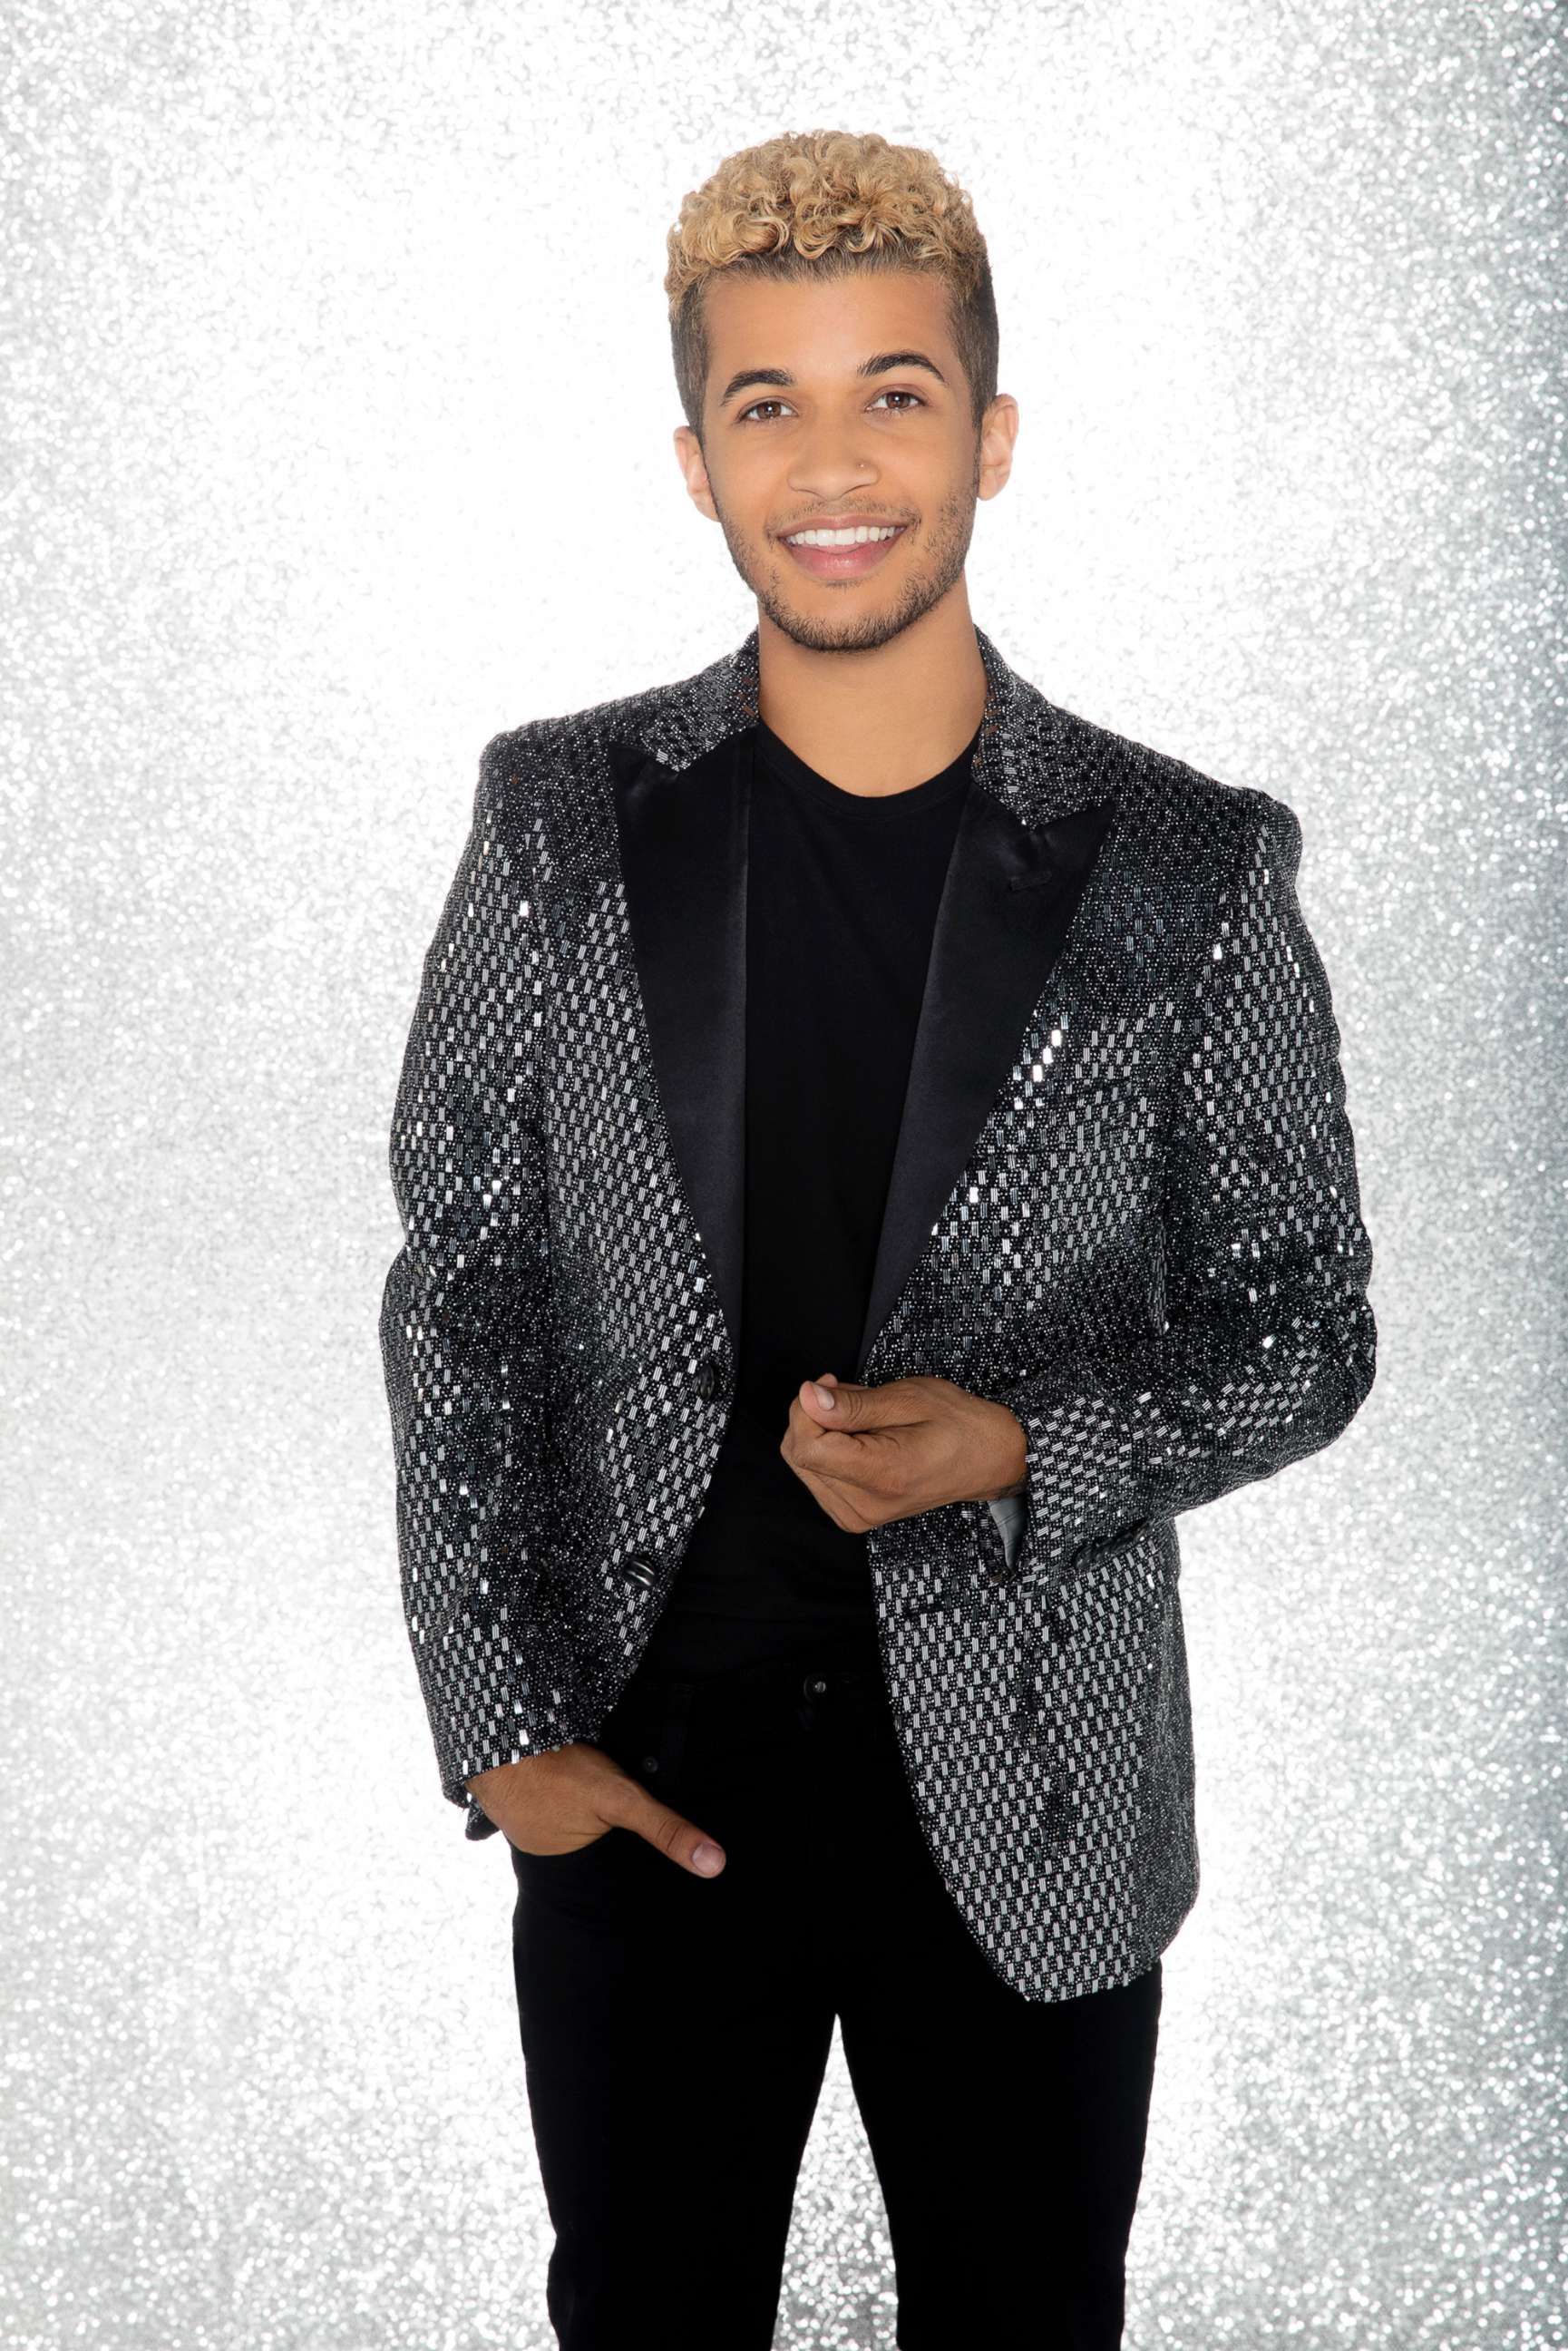 PHOTO: Jordan Fisher will compete for the mirror ball title on the new season "Dancing With The Stars."